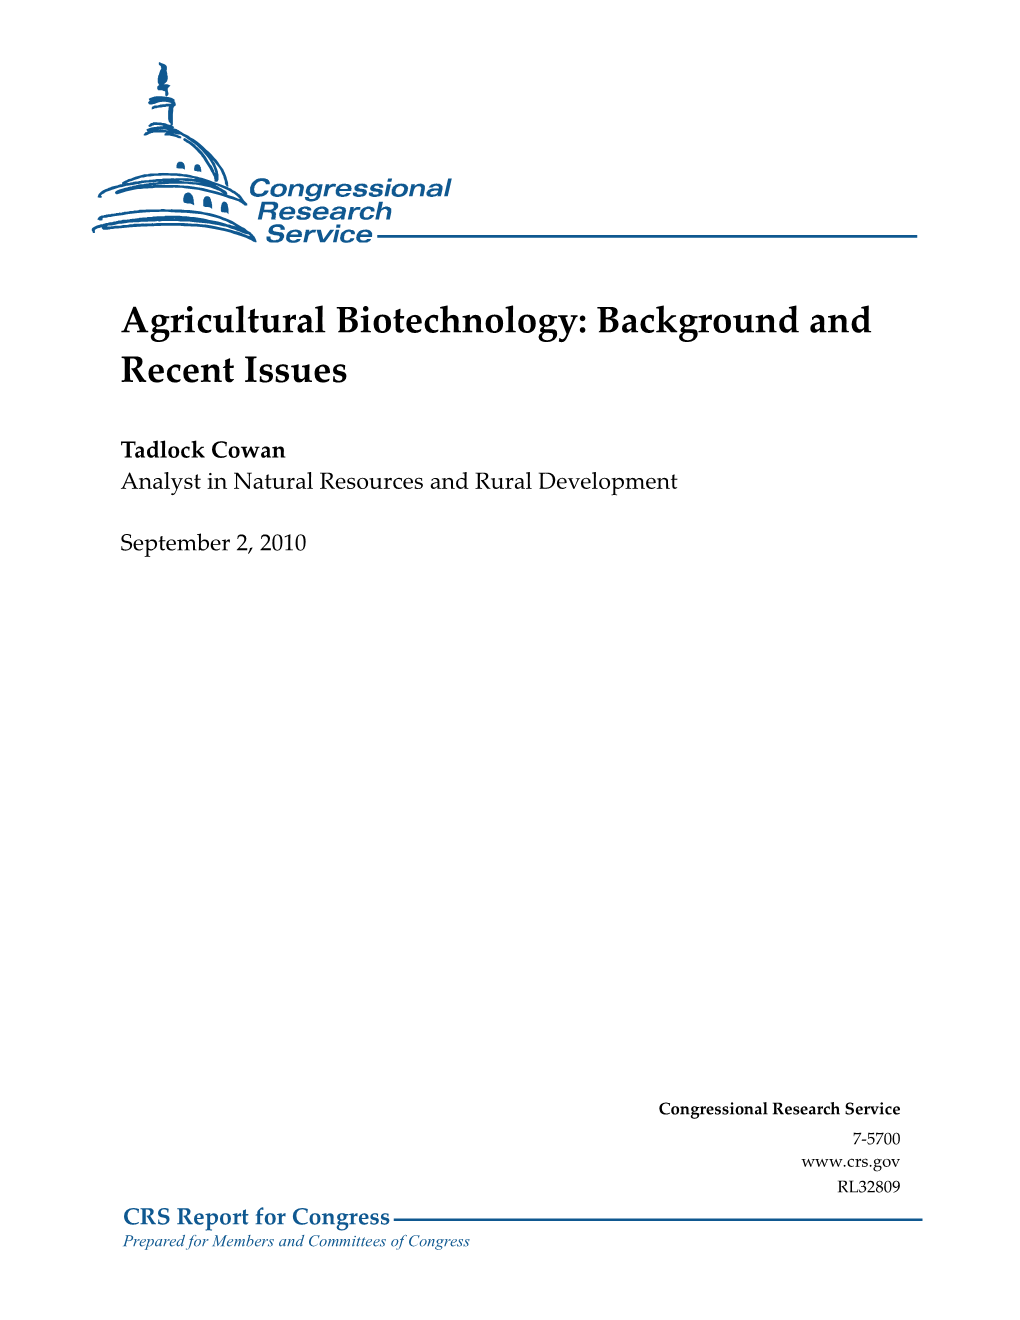 Agricultural Biotechnology: Background and Recent Issues